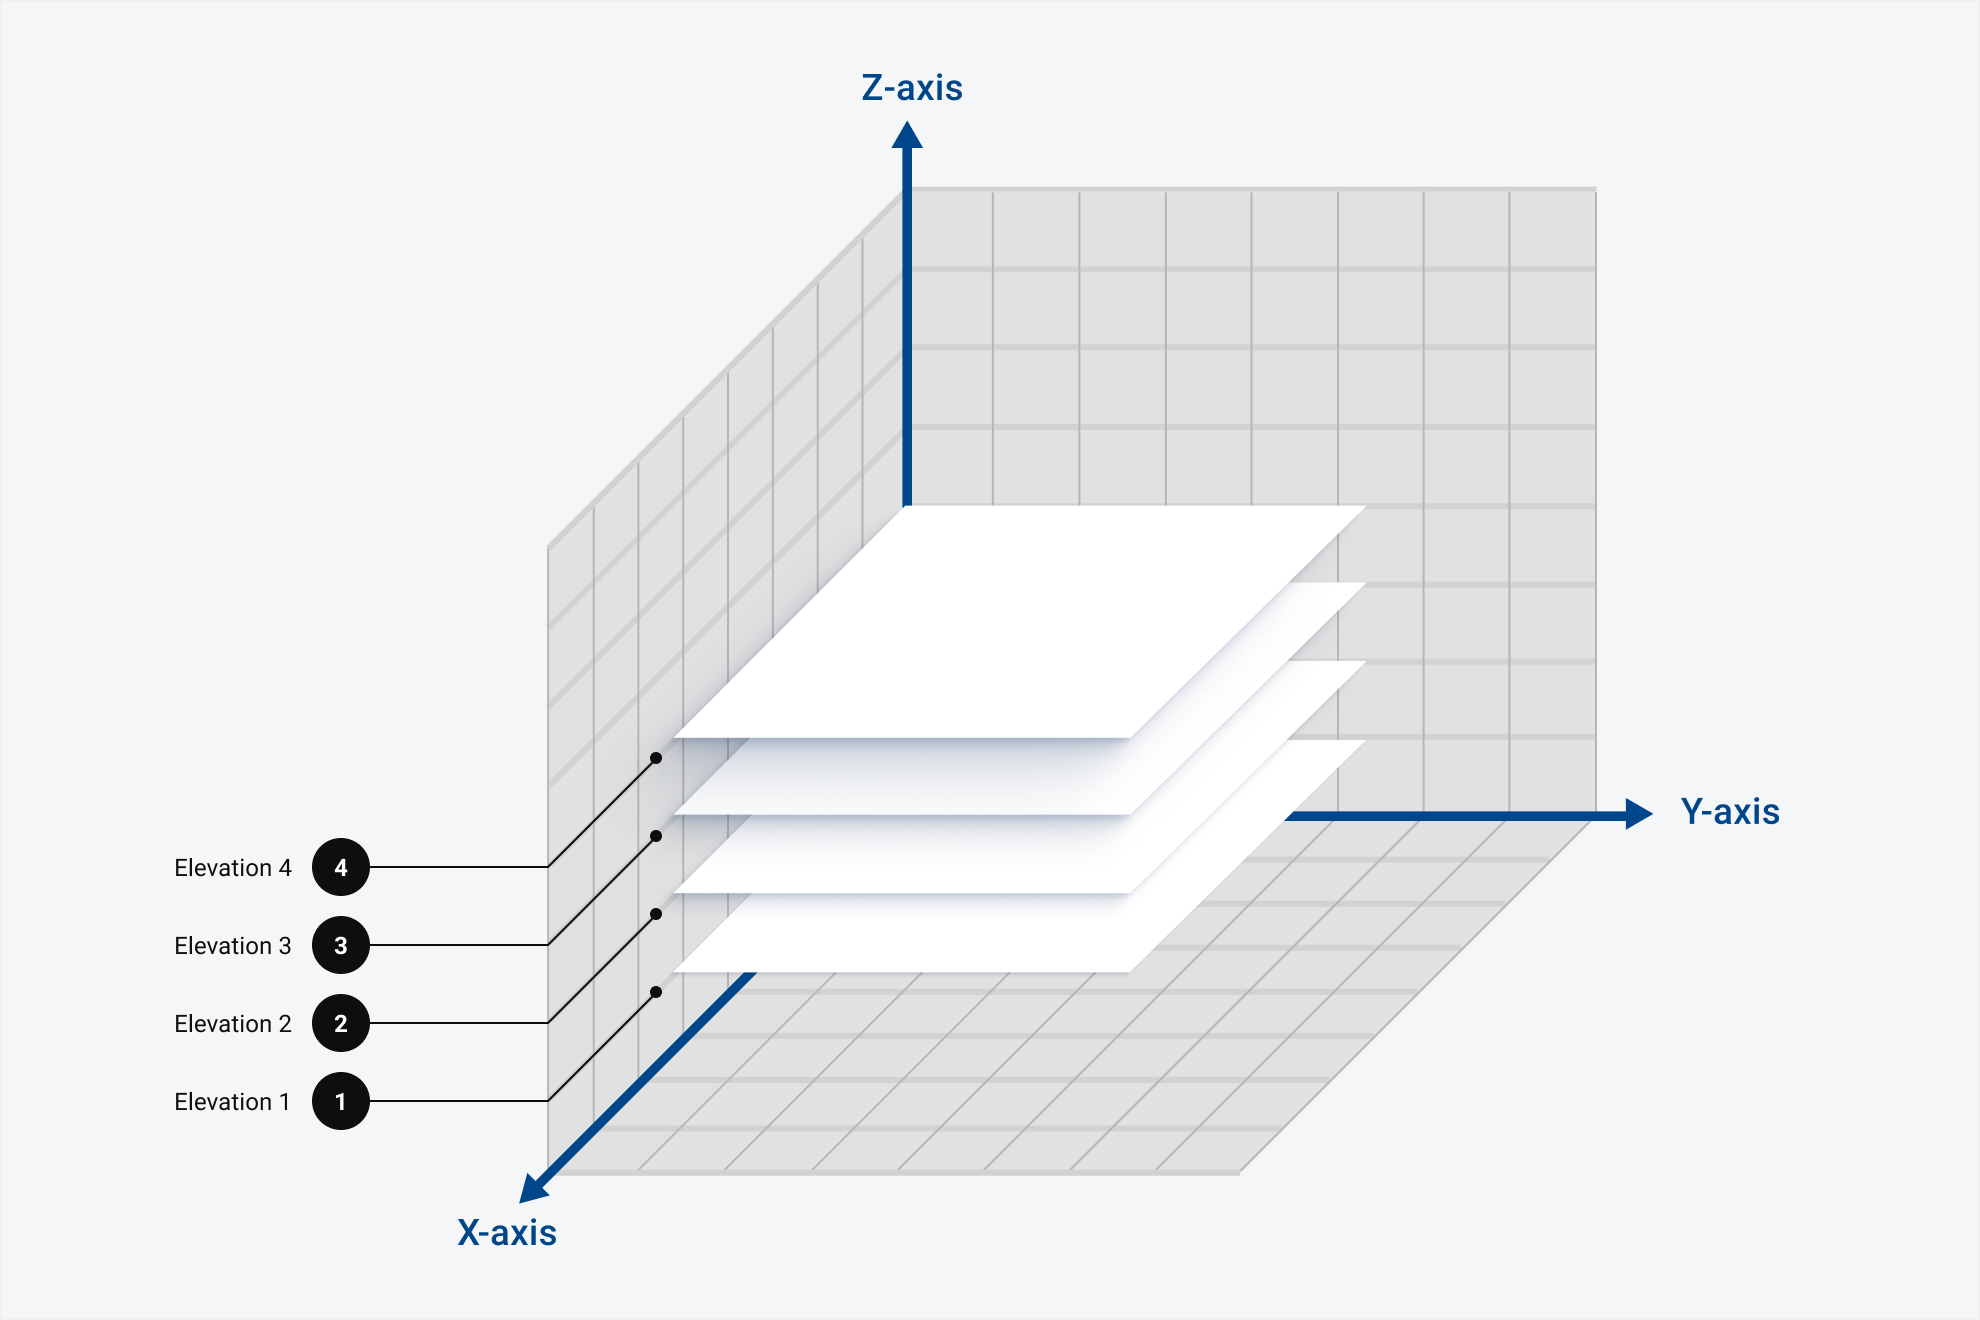 Objects exist in a three-dimensional plane at different depths, represented here by the Y-axis. Each higher depth uses increased shadows to create four levels of elevation:
Elevation Level 1 in this diagram will appear to have the least amount of depth on a page because it falls lower on the Z-axis.
Elevation Level 2 is higher on the Z-axis, rising above Level 1.
Elevation Level 3 will fall between the highest level and the lowest levels of elevation.
Elevation Level 4 is highest on the Z-axis and will appear to have the most depth and dimension on a page.